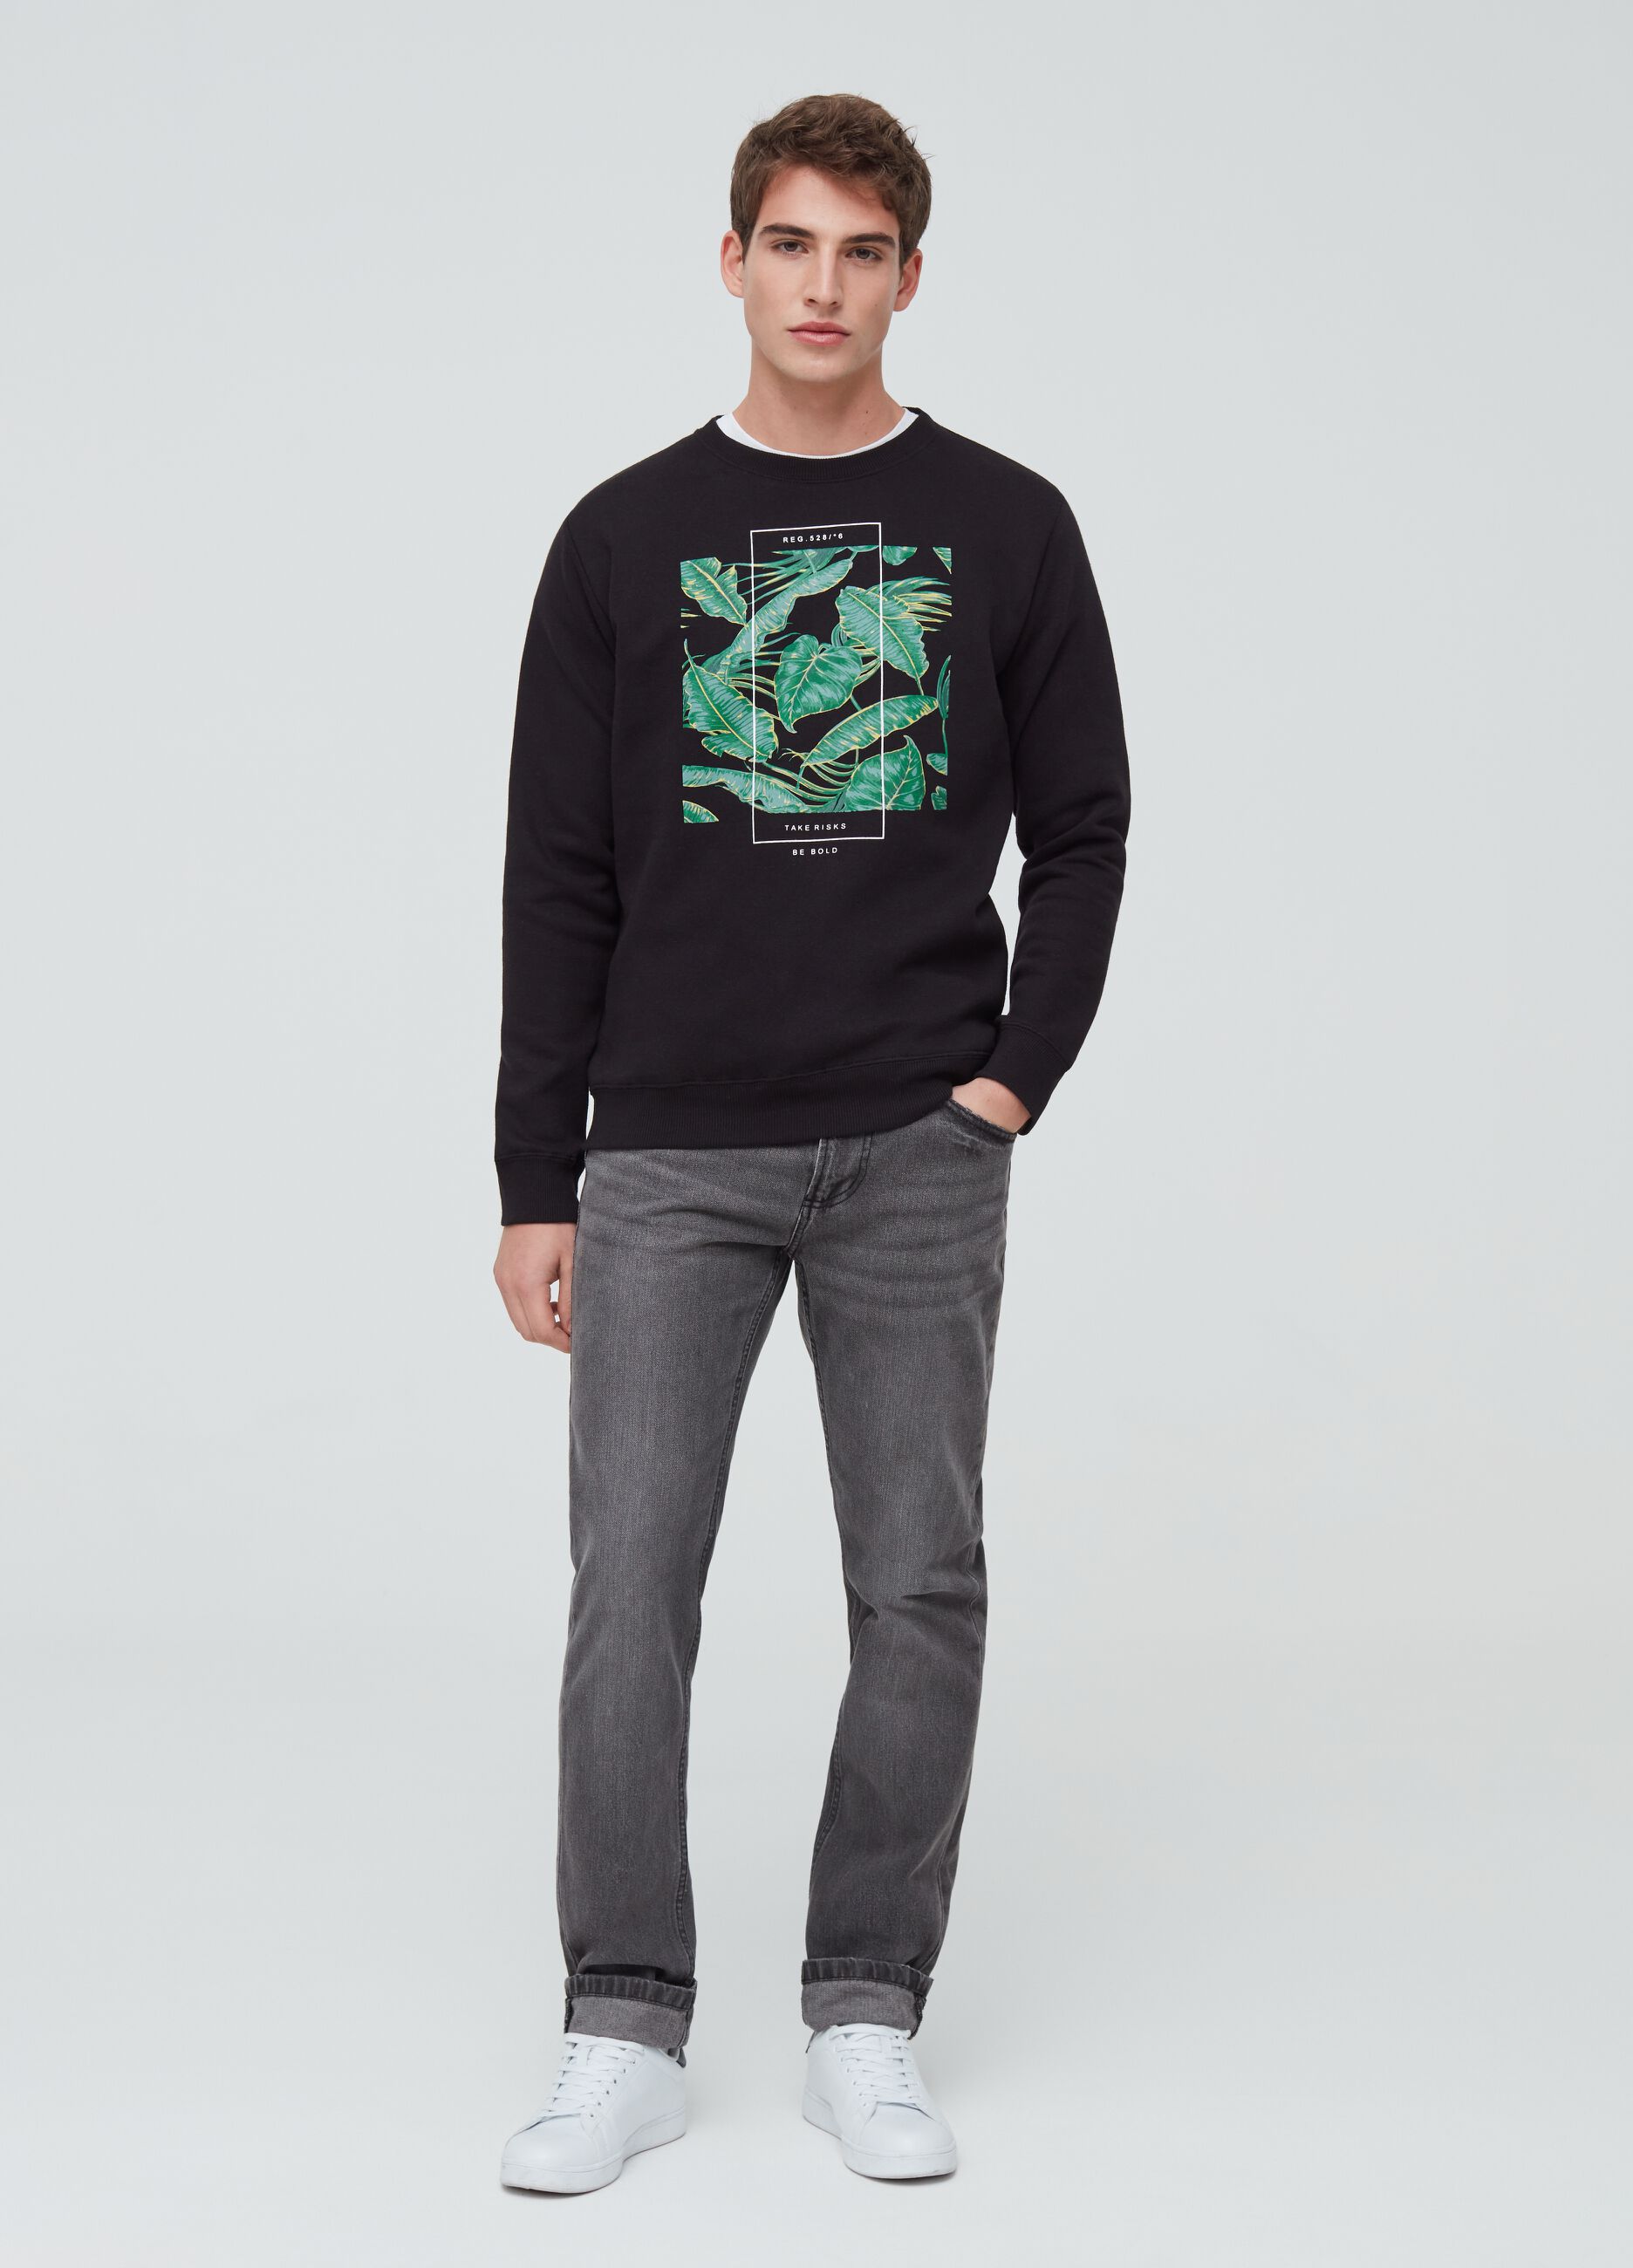 Sweatshirt with round neck and leaves print